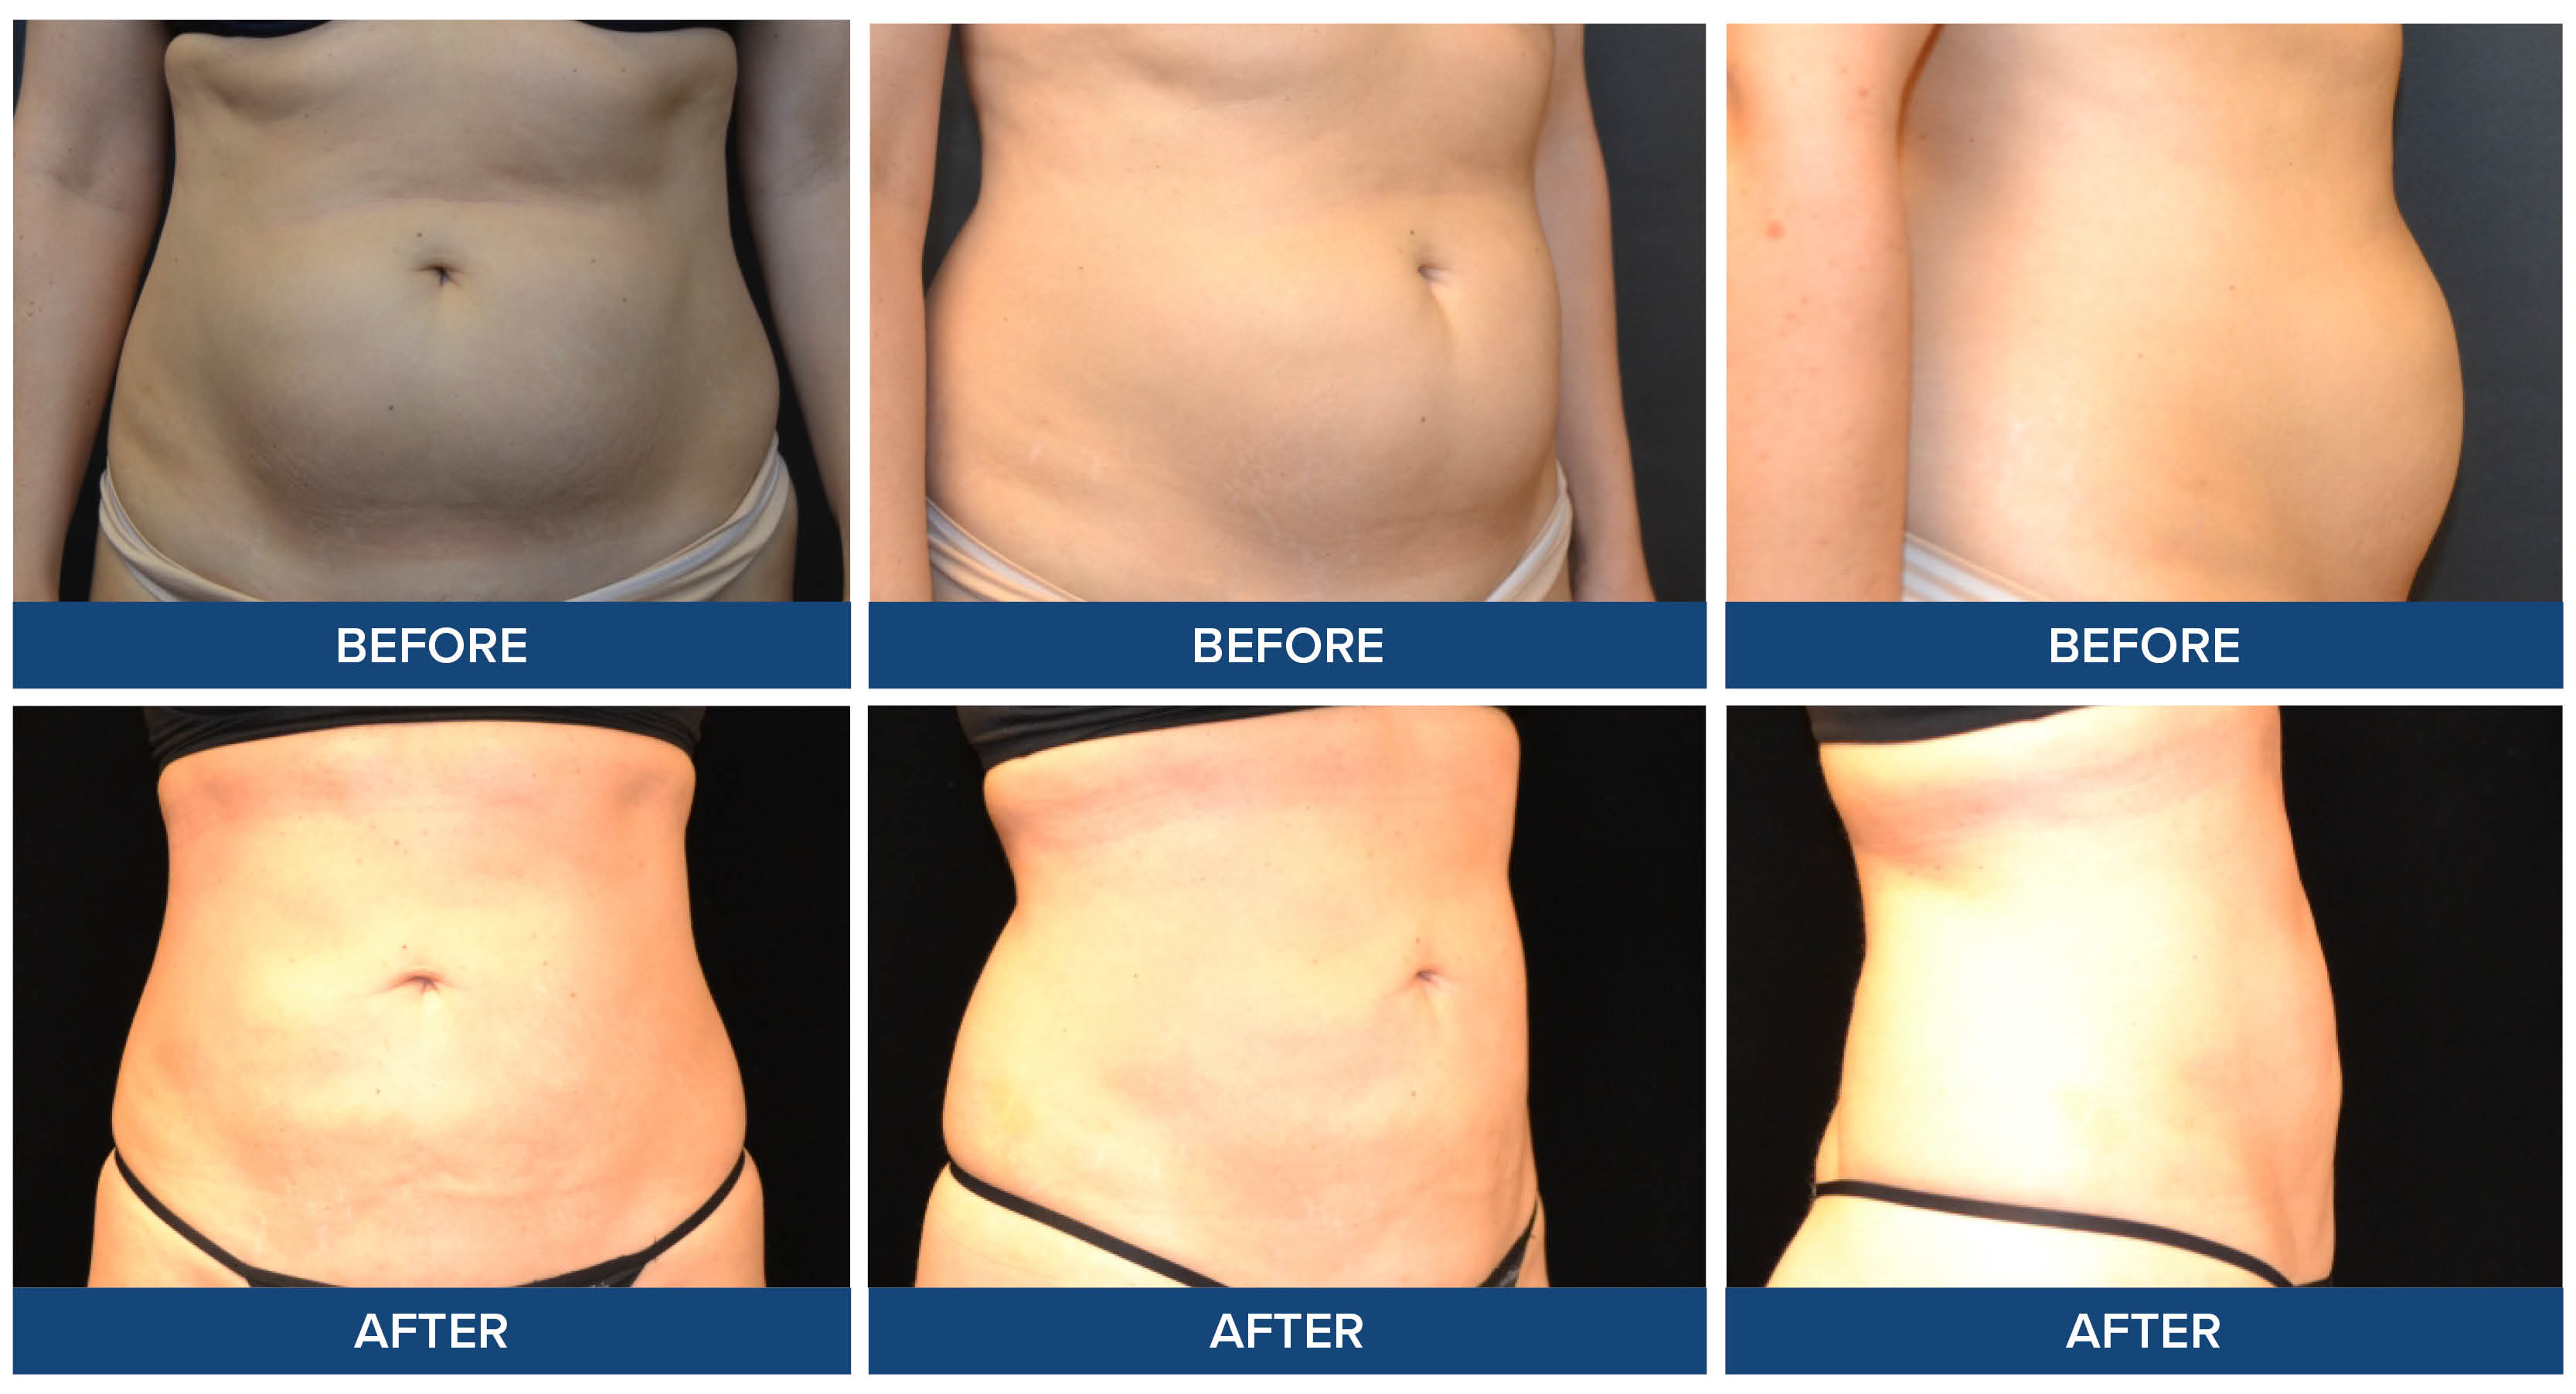 Abdomen liposuction before and after photos by Dr. Raj Sinha